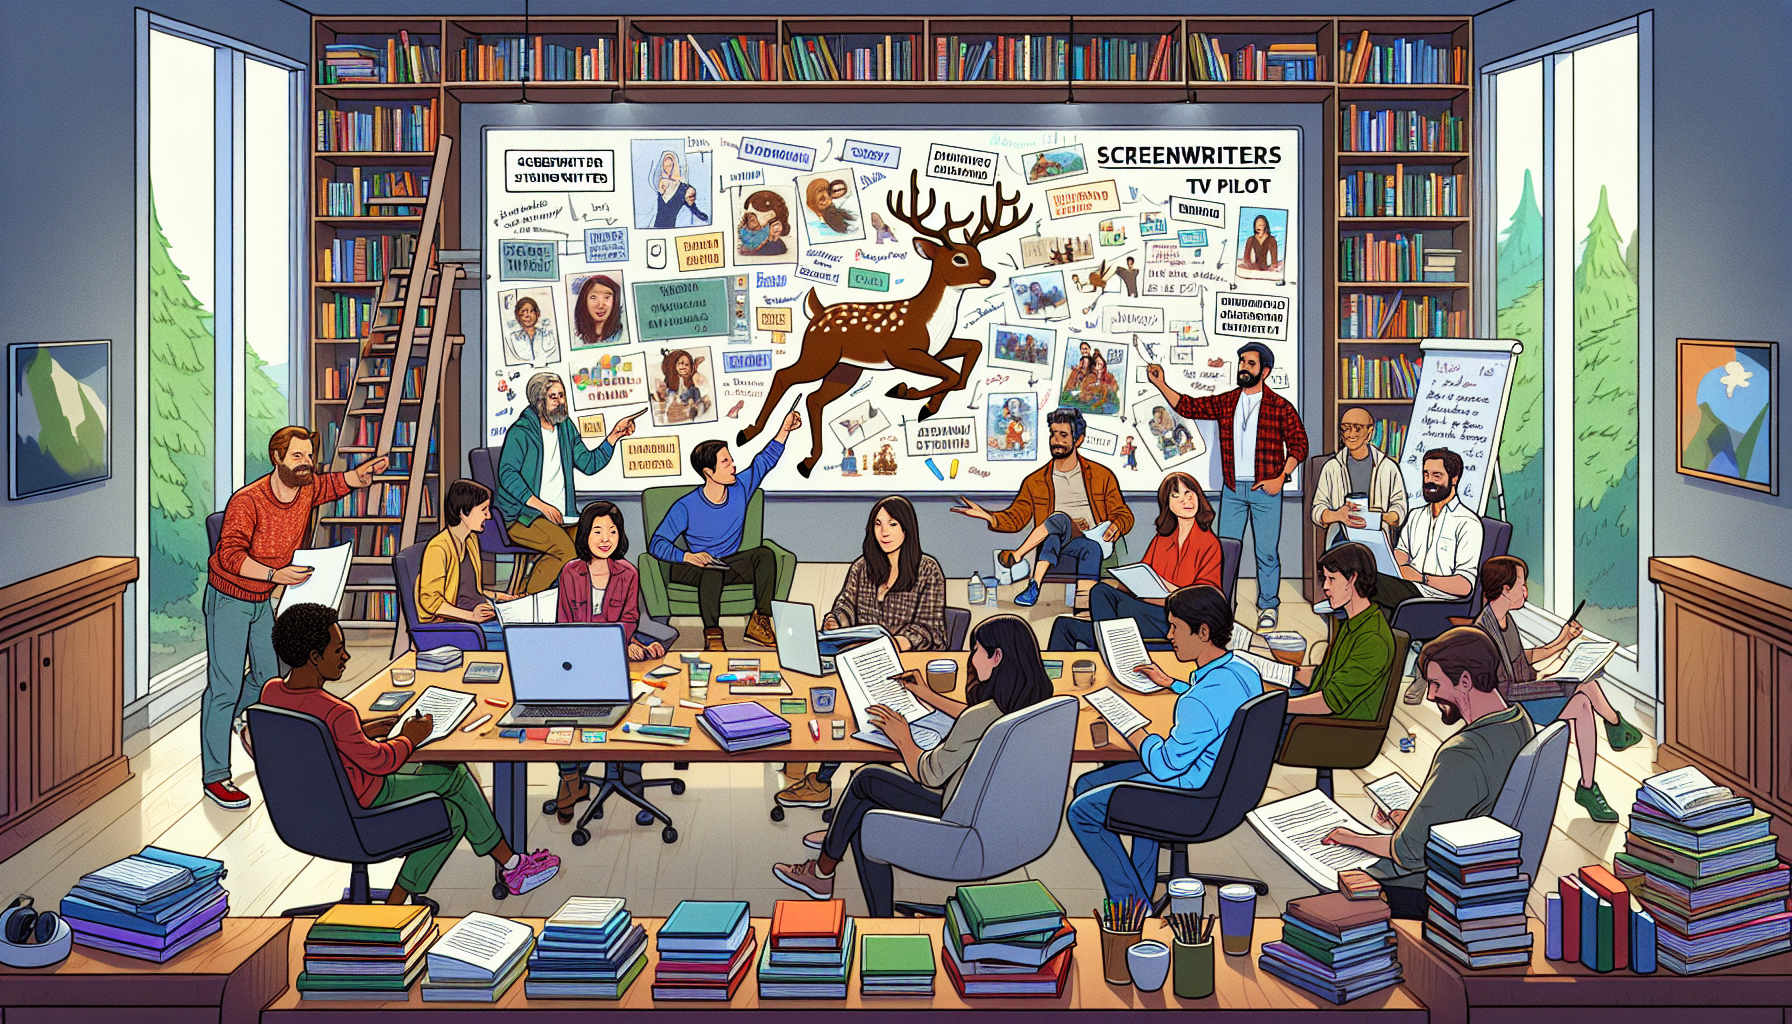 A cozy writer's room filled with diverse screenwriters brainstorming, with a large whiteboard in the background filled with notes and drawings depicting scenes from the Baby Reindeer TV pilot episode.